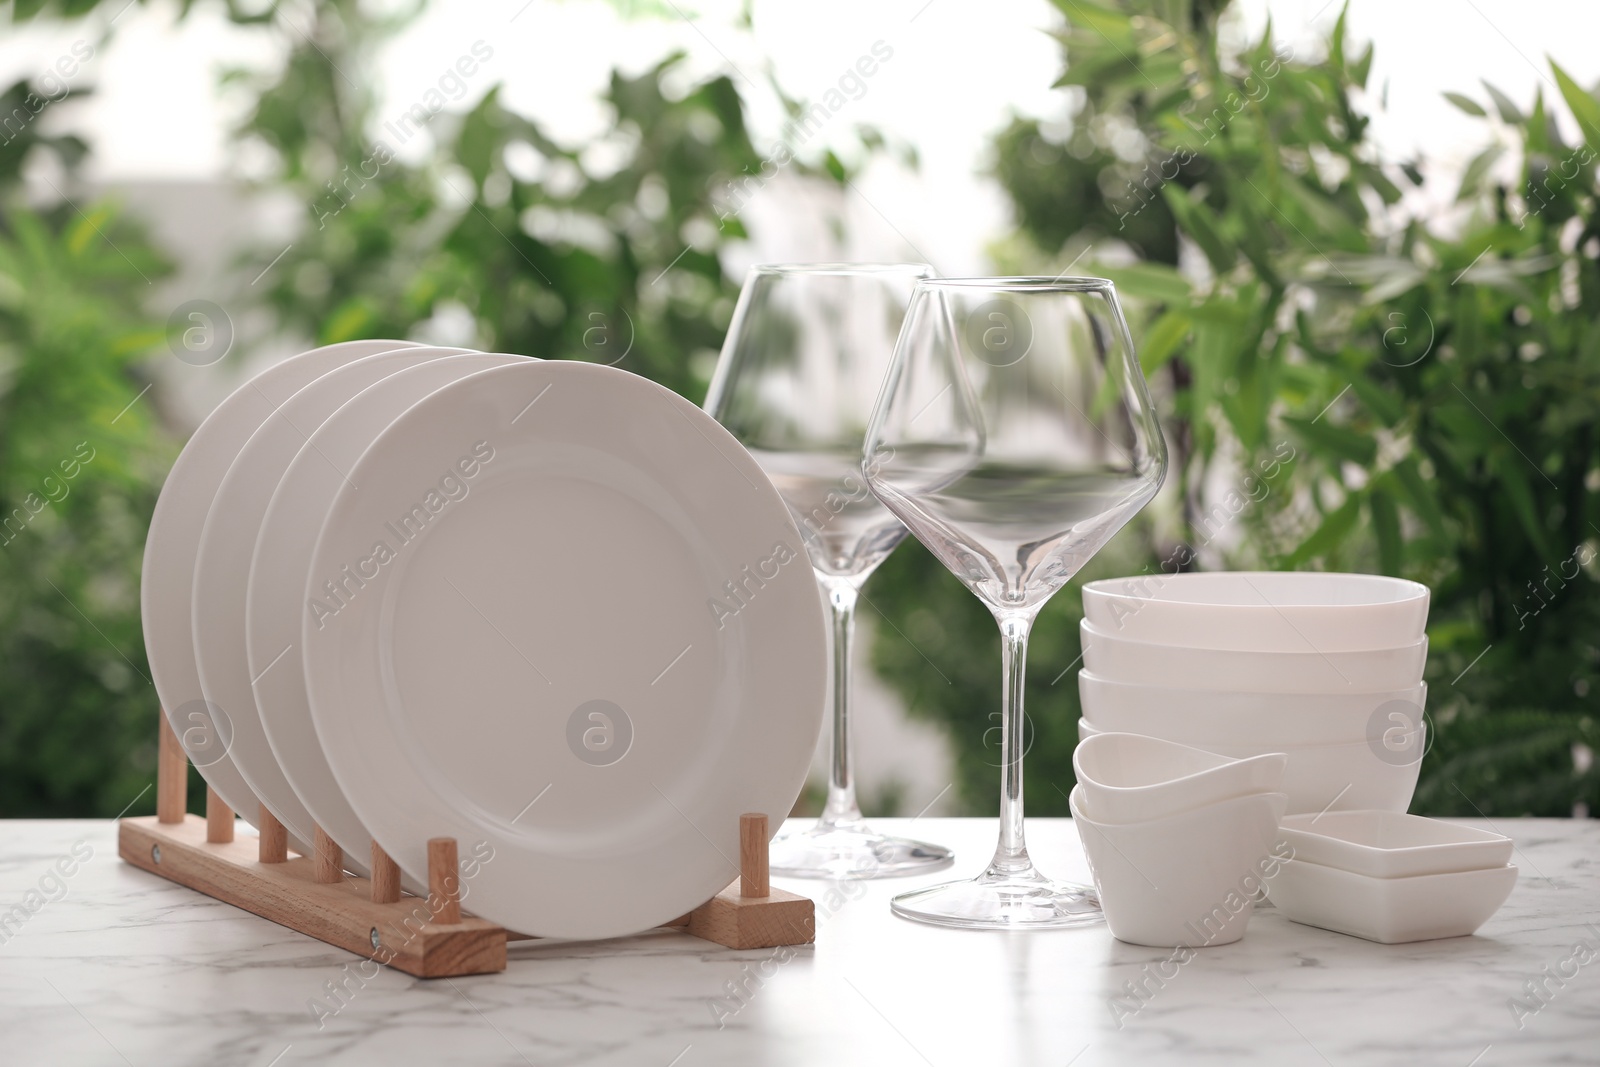 Photo of Setclean dishware and wineglasses on white table against blurred background